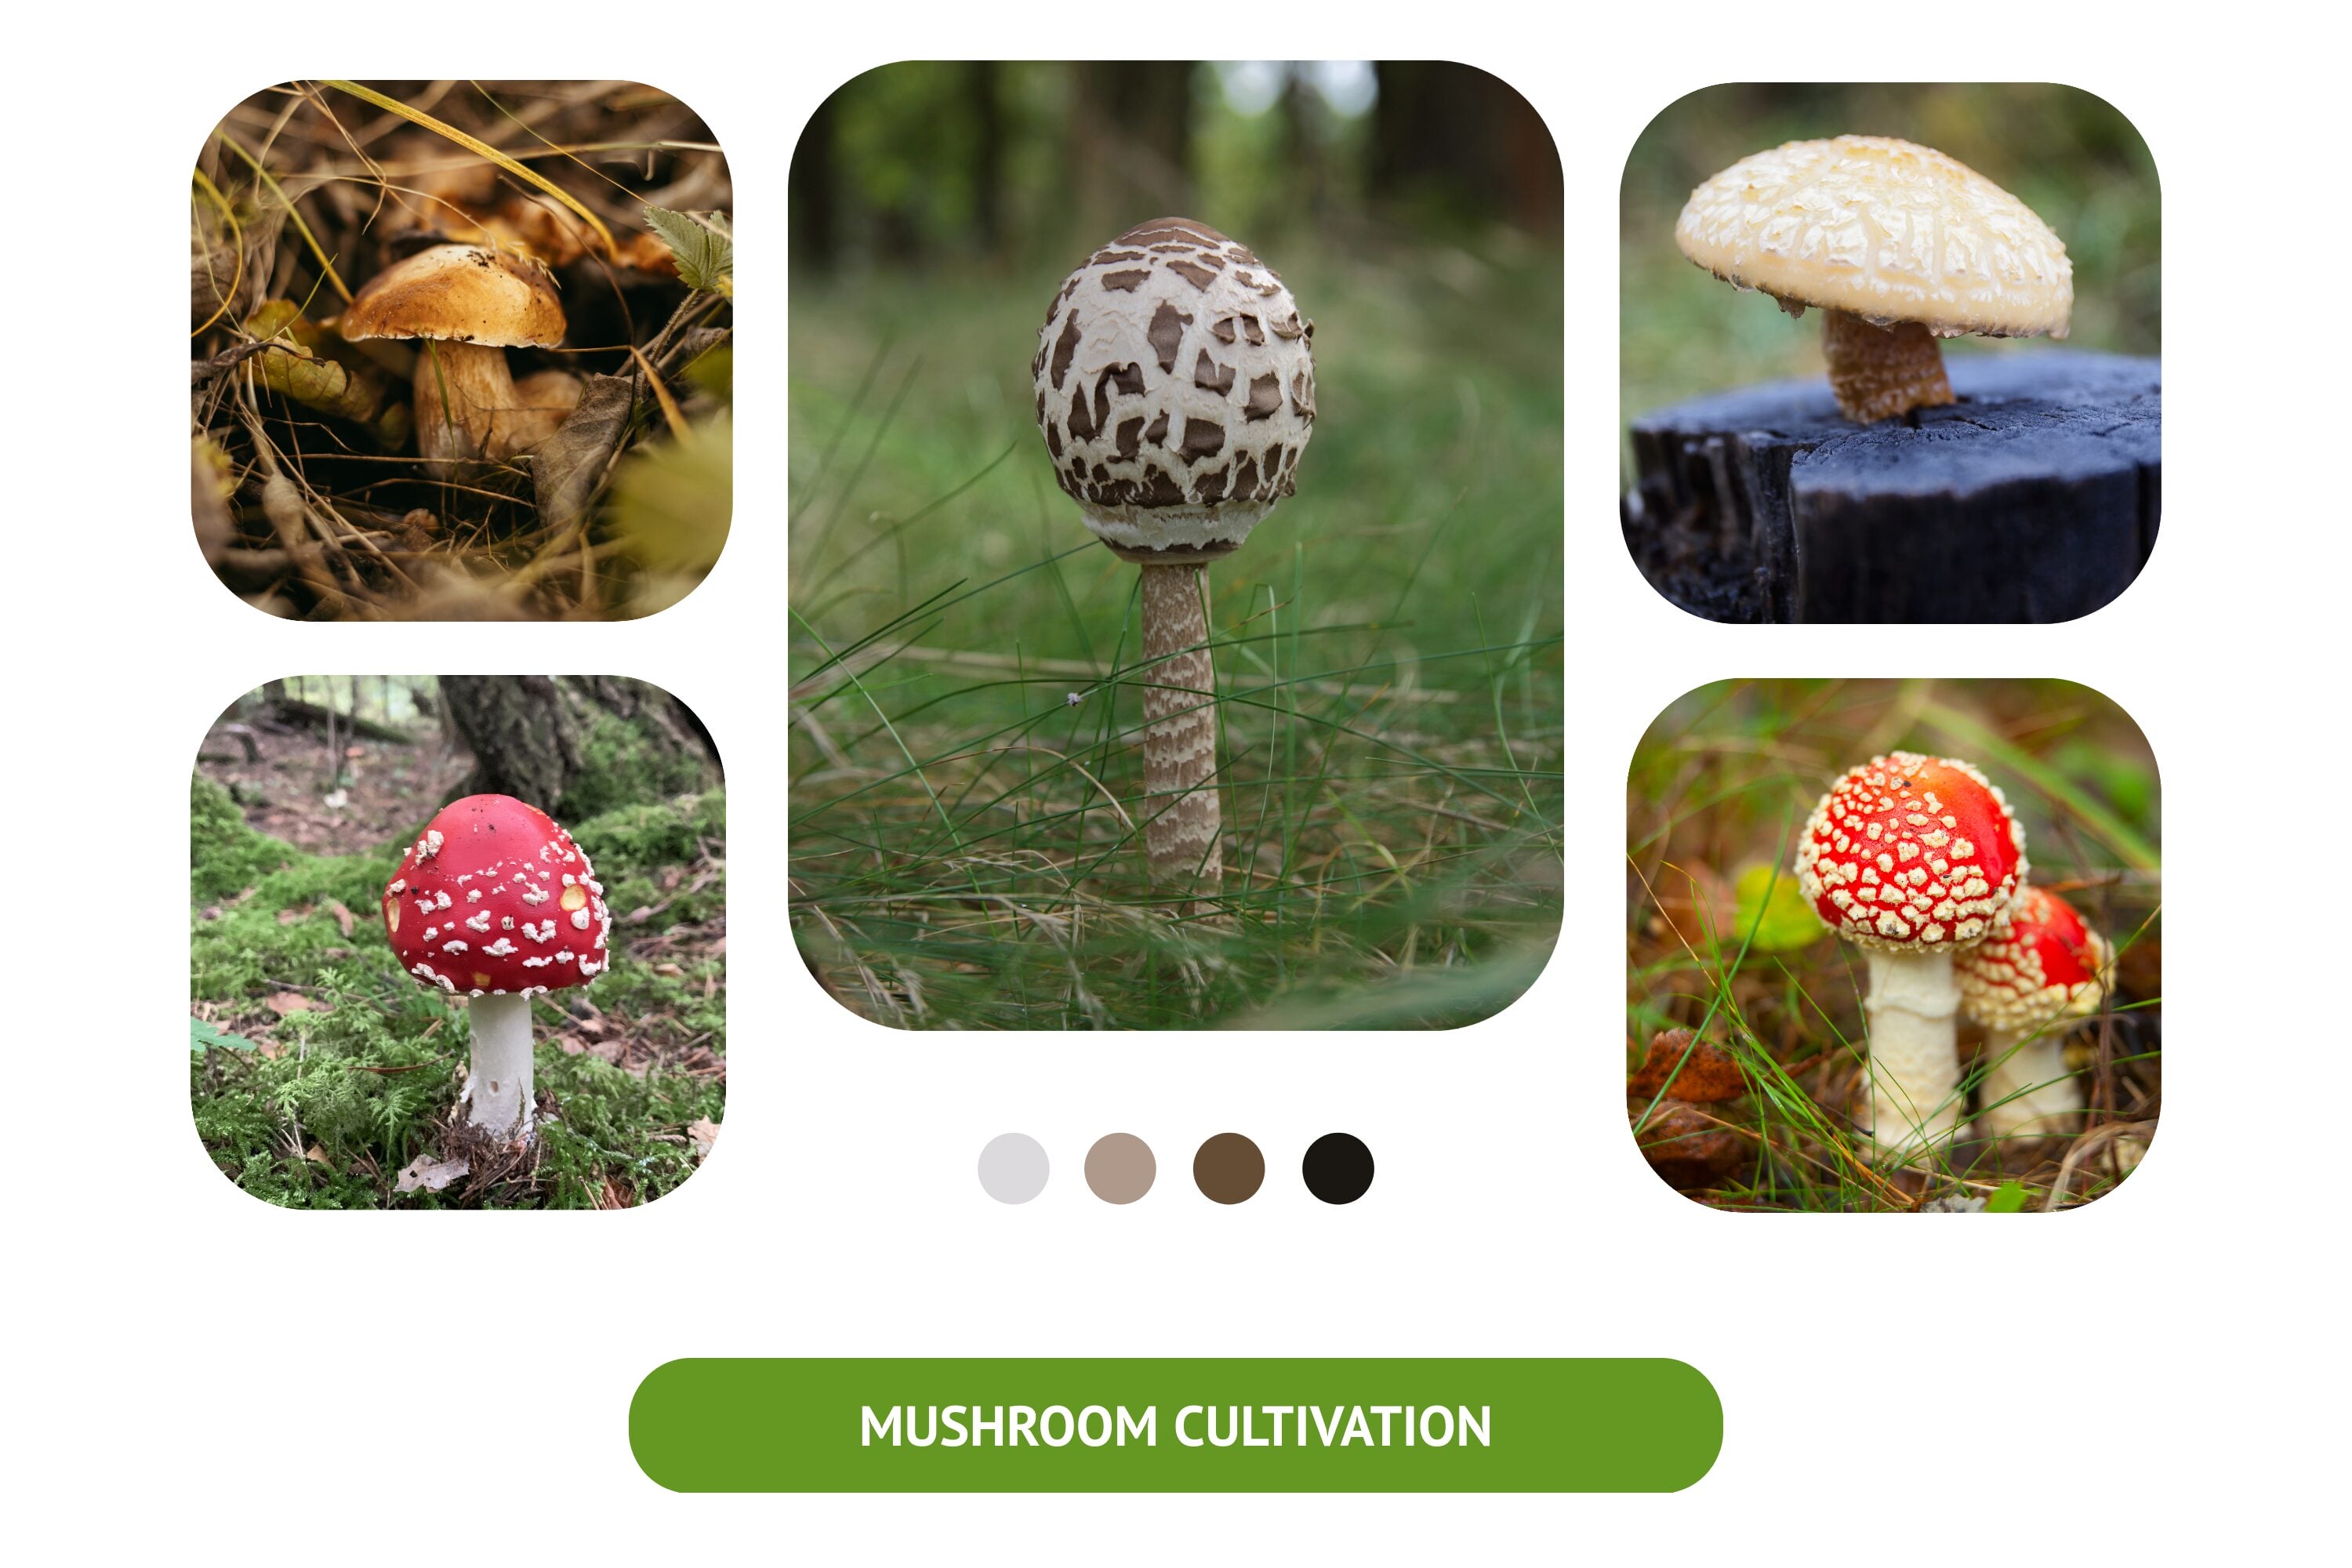 Discover the fascinating world of mushroom cultivation.